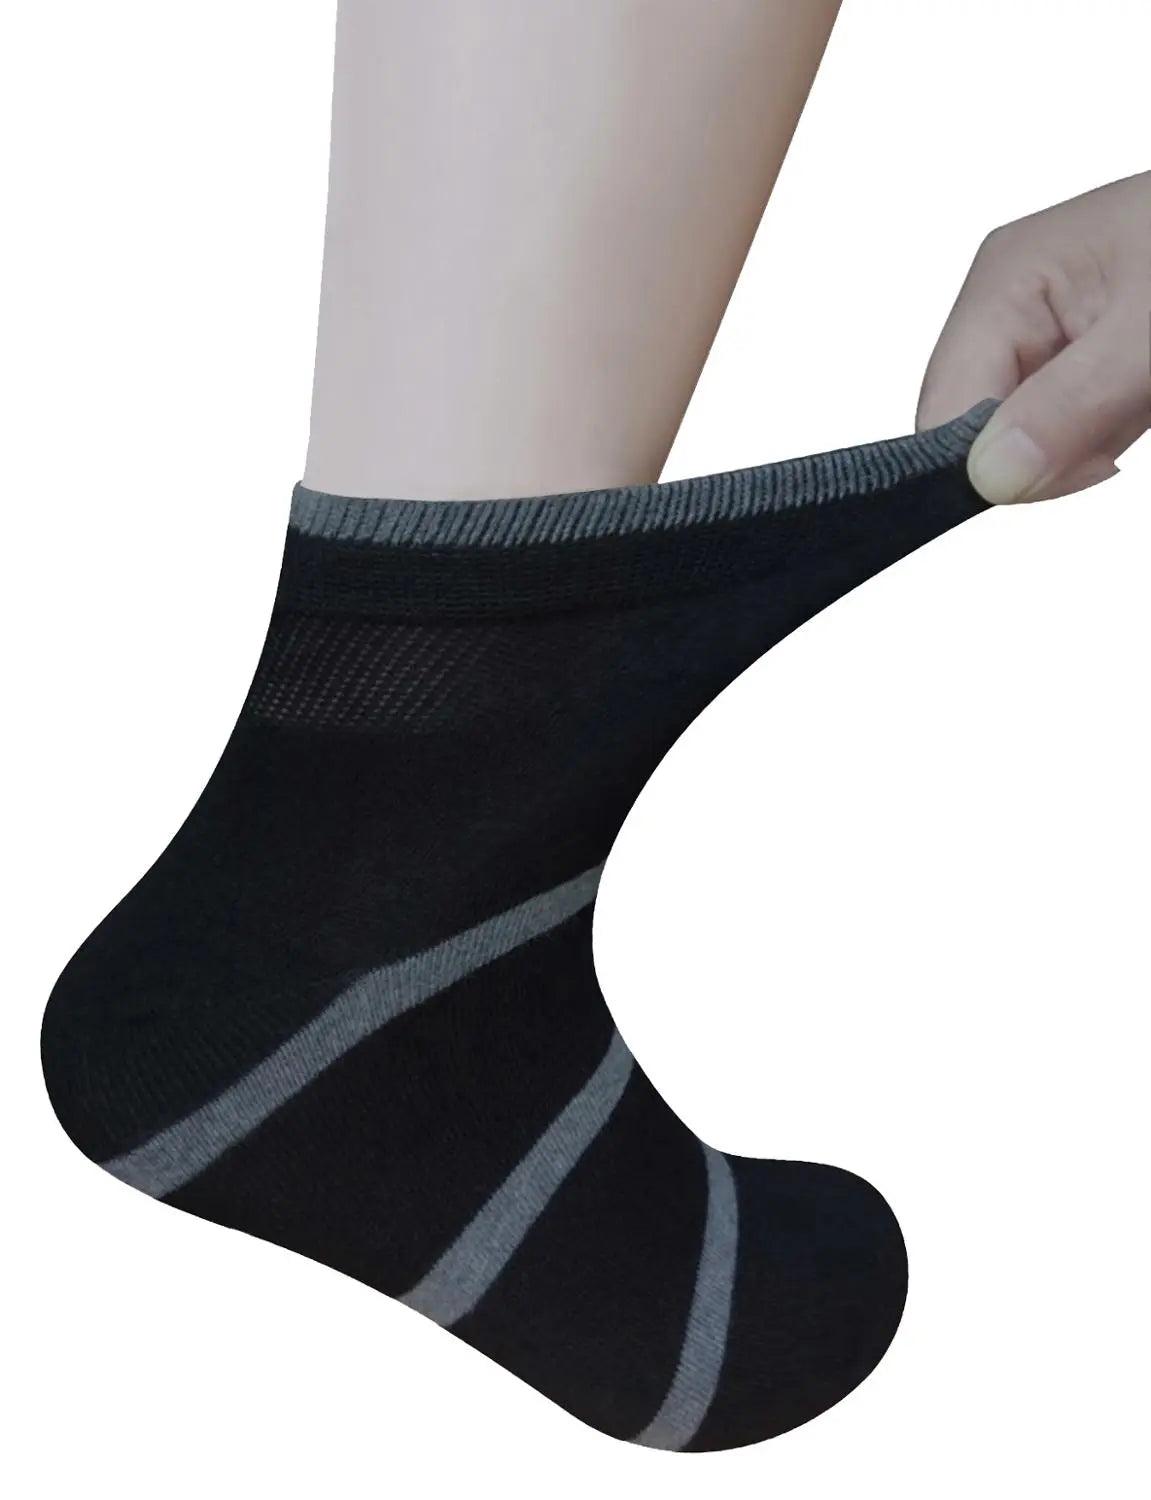 6 Pairs Men's Bamboo Diabetic Ankle Socks with Seamless Toe - Bamboo.